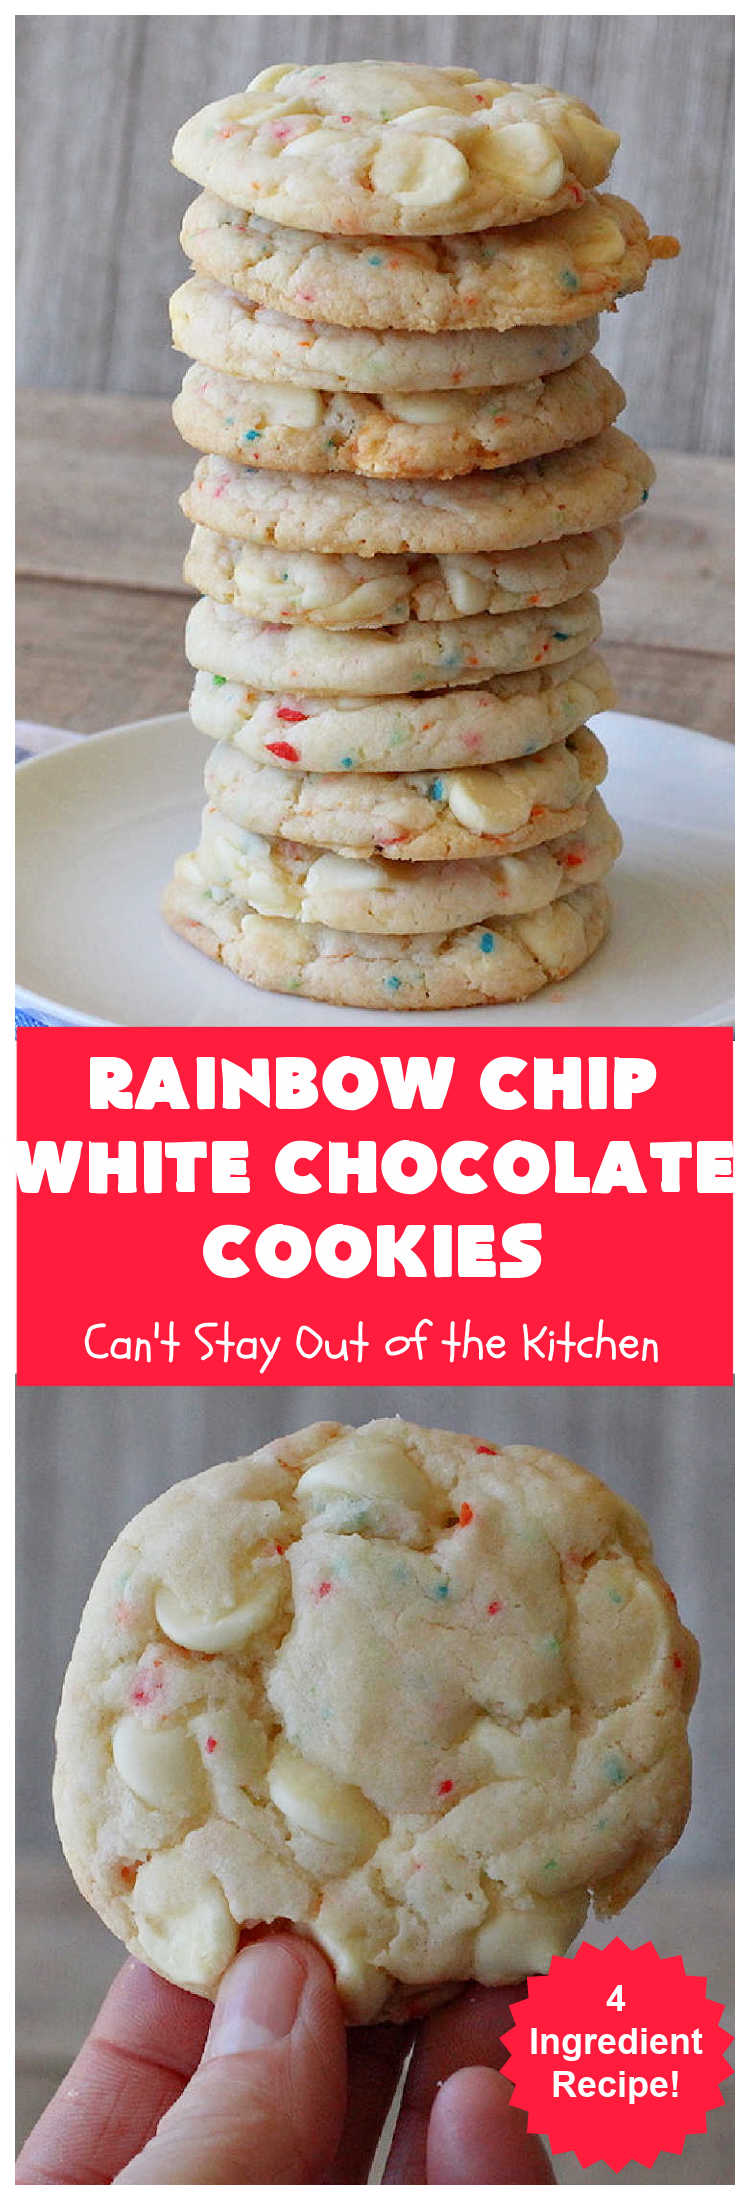 Rainbow Chip White Chocolate Cookies | Can't Stay Out of the Kitchen | these luscious 4-ingredient #cookies start with a #RainbowChipCakeMix so they're incredibly easy. #WhiteChocolateChips bump up the flavor and texture. They're perfect for birthday parties or any kind of kid-friendly function. You and your kids will enjoy every bite! #dessert #chocolate #Funfetti #RainbowChips #RainbowSprinkles #RainbowSprinkleDessert #ChocolateDessert #tailgating #holiday #BirthdayParties #HolidayBaking #WhiteChocolate #RainbowChipWhiteChocolateCookies